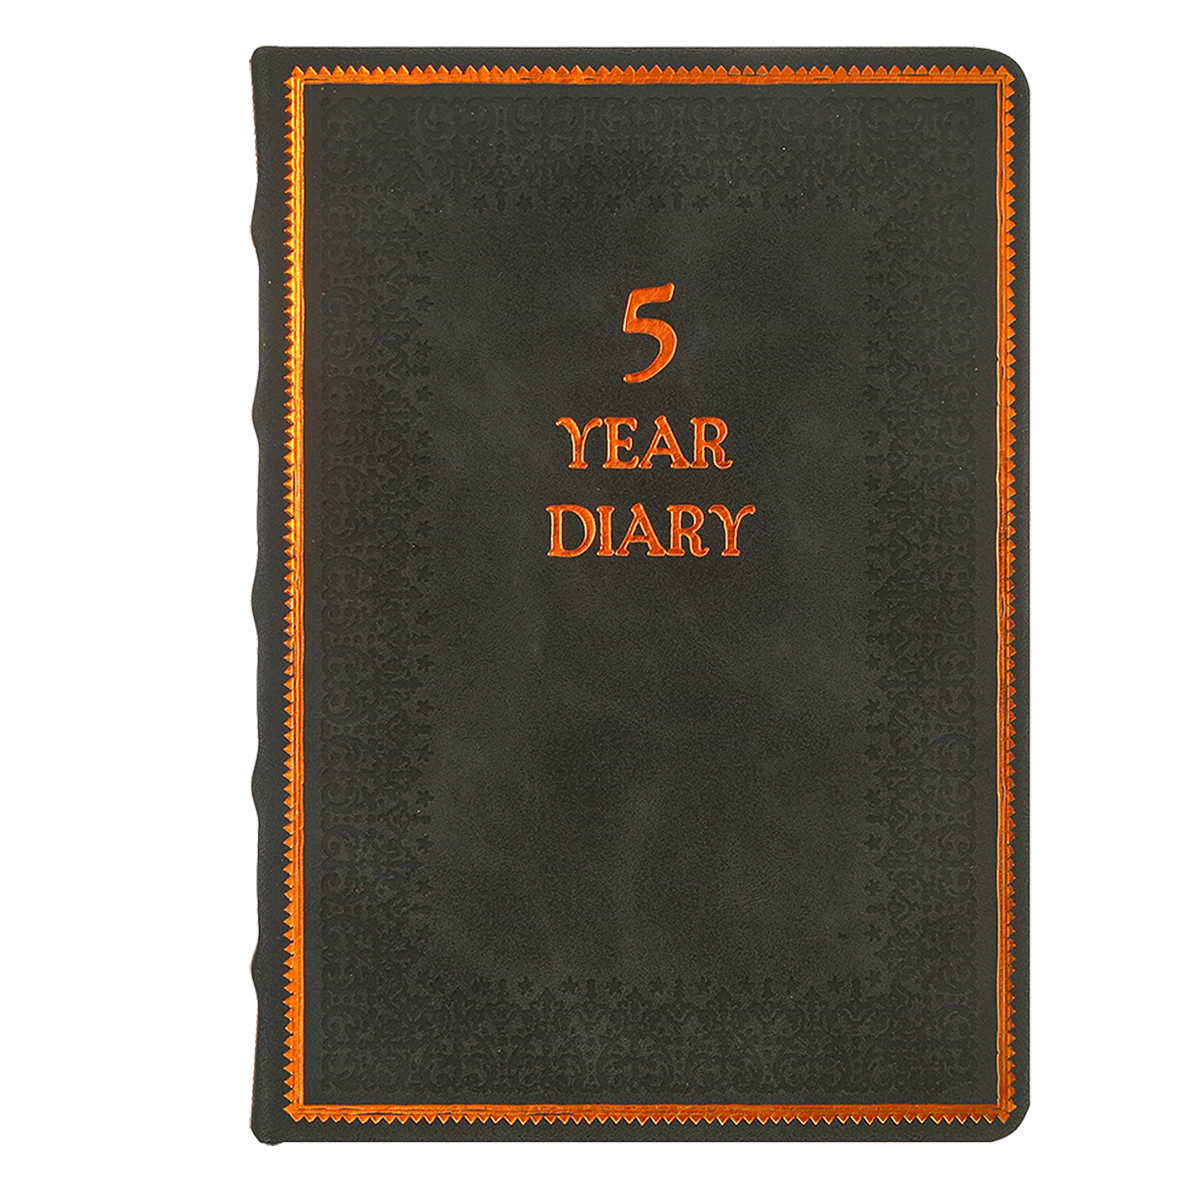 Five-Year Vintage Look Diary (Motivational, Prayer, Gratitude, Mindfulness, Self-Help and Daily Affirmations) 4.64x6.6", 394p. (Black)